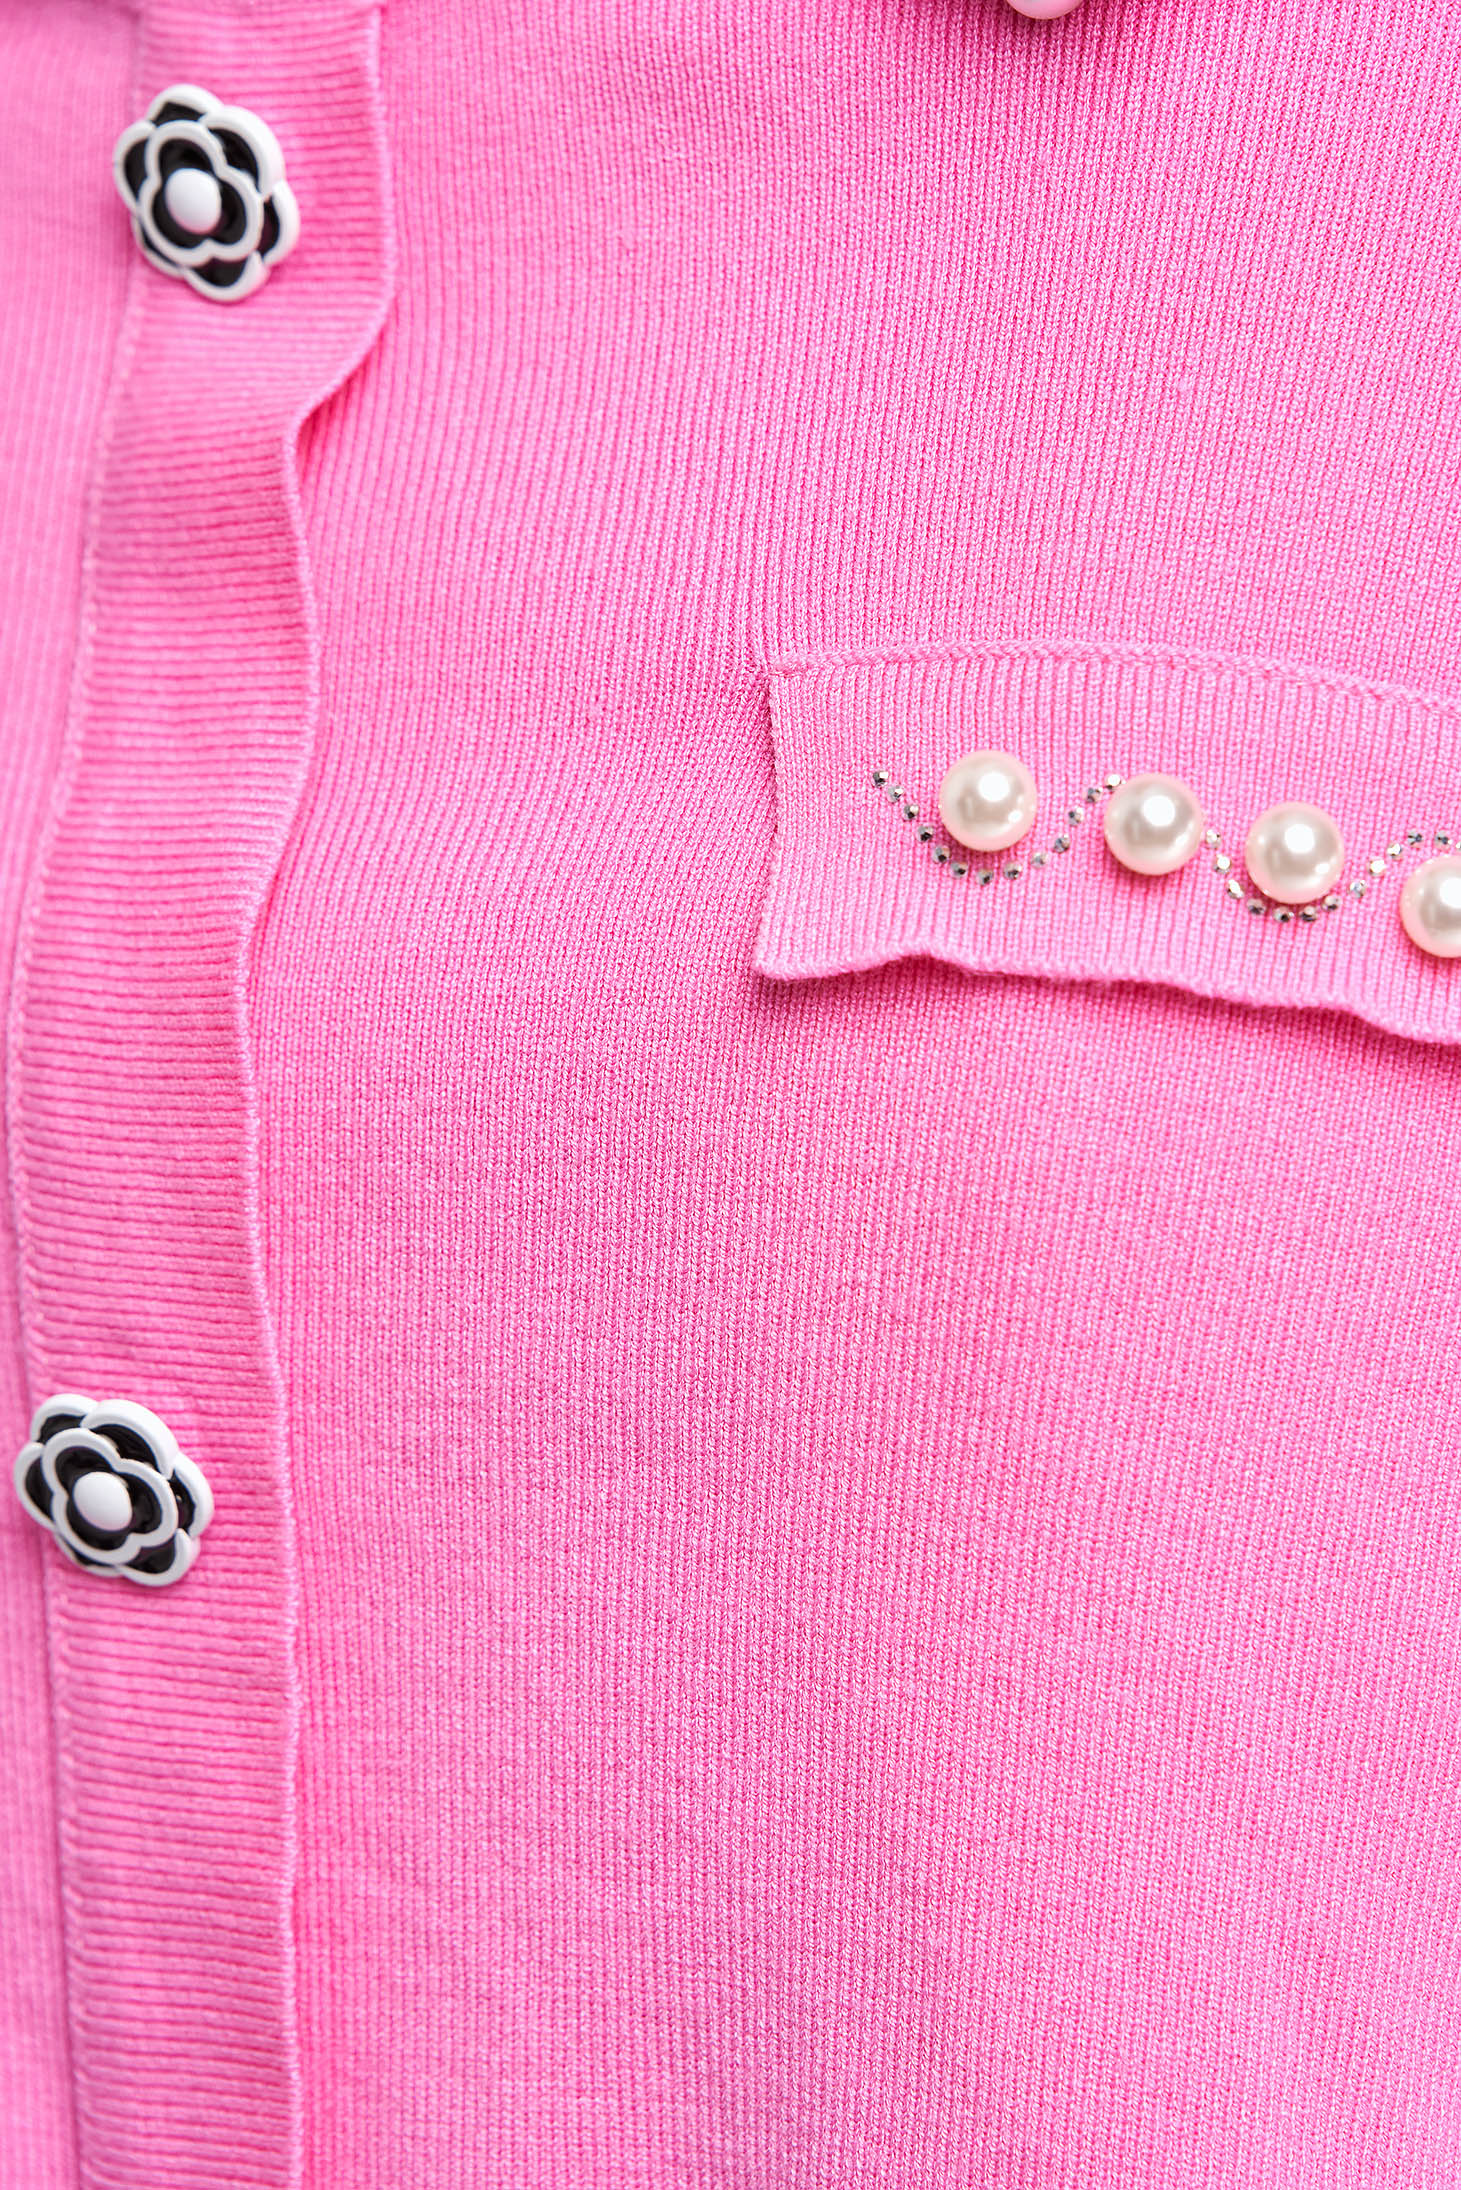 Pink sweater knitted loose fit with pearls with button accessories 5 - StarShinerS.com